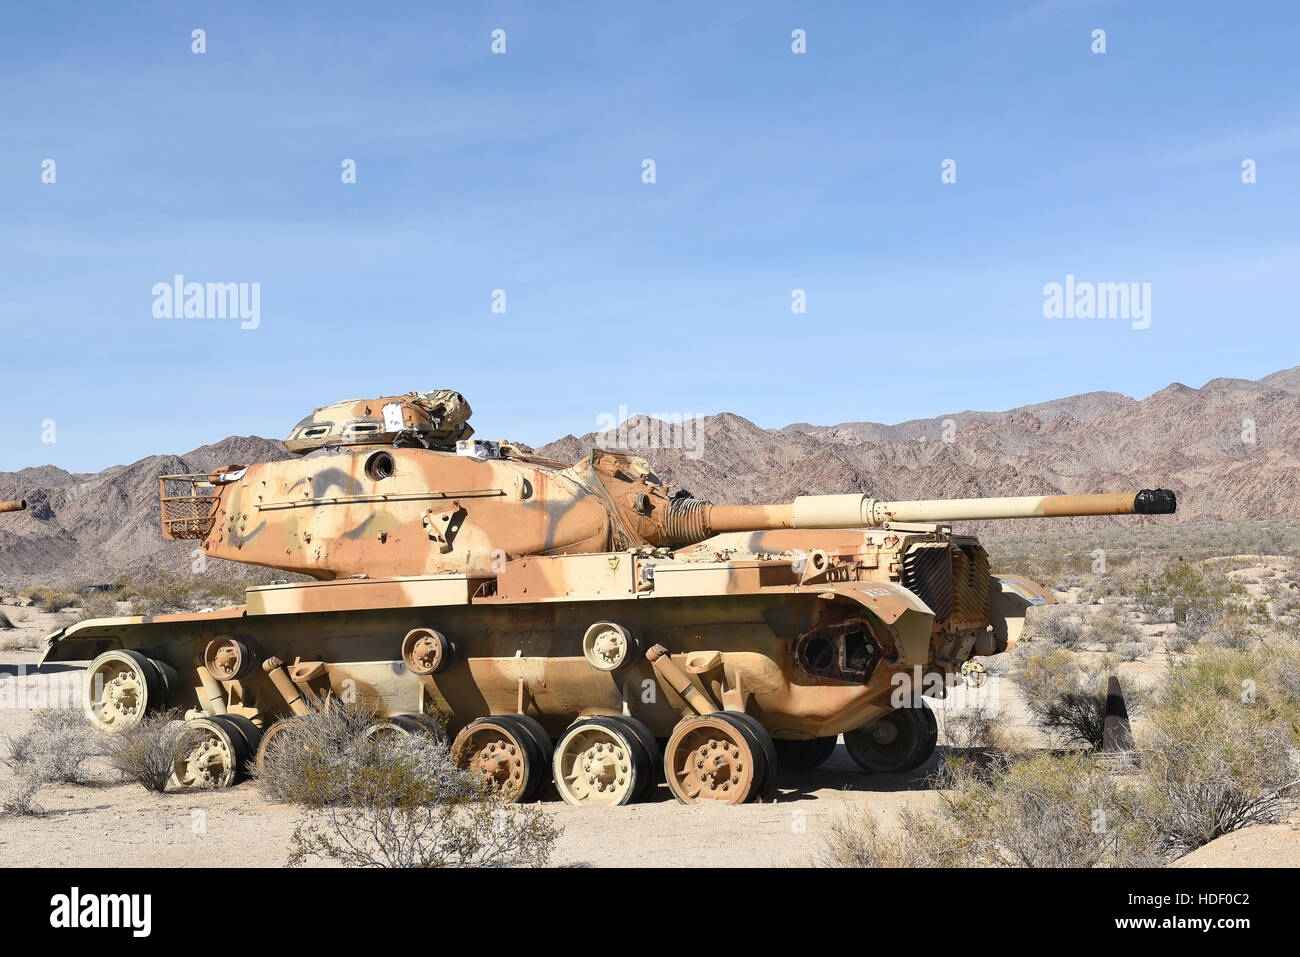 CHIRIACO SUMMIT, CA - DECEMBER 10, 2016: An M60 Tank. The derelict vehicle is on display at the General Patton Memorial Museum in  California Stock Photo